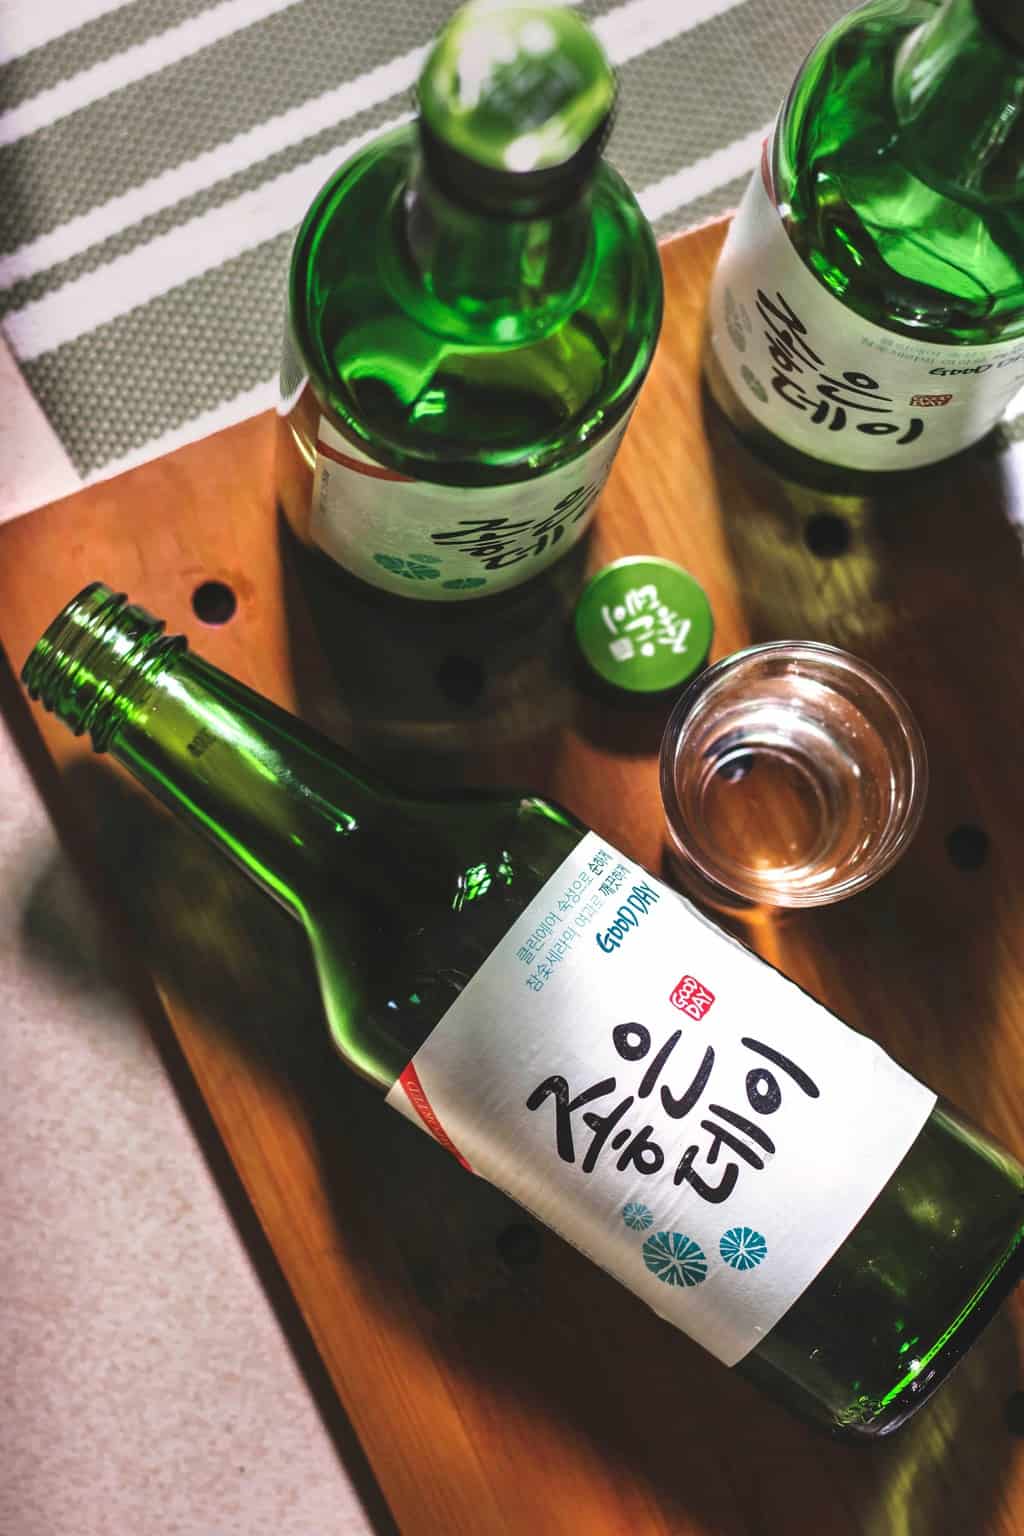 3 bottles of soju, one lying down on its side, with a soju glass near it